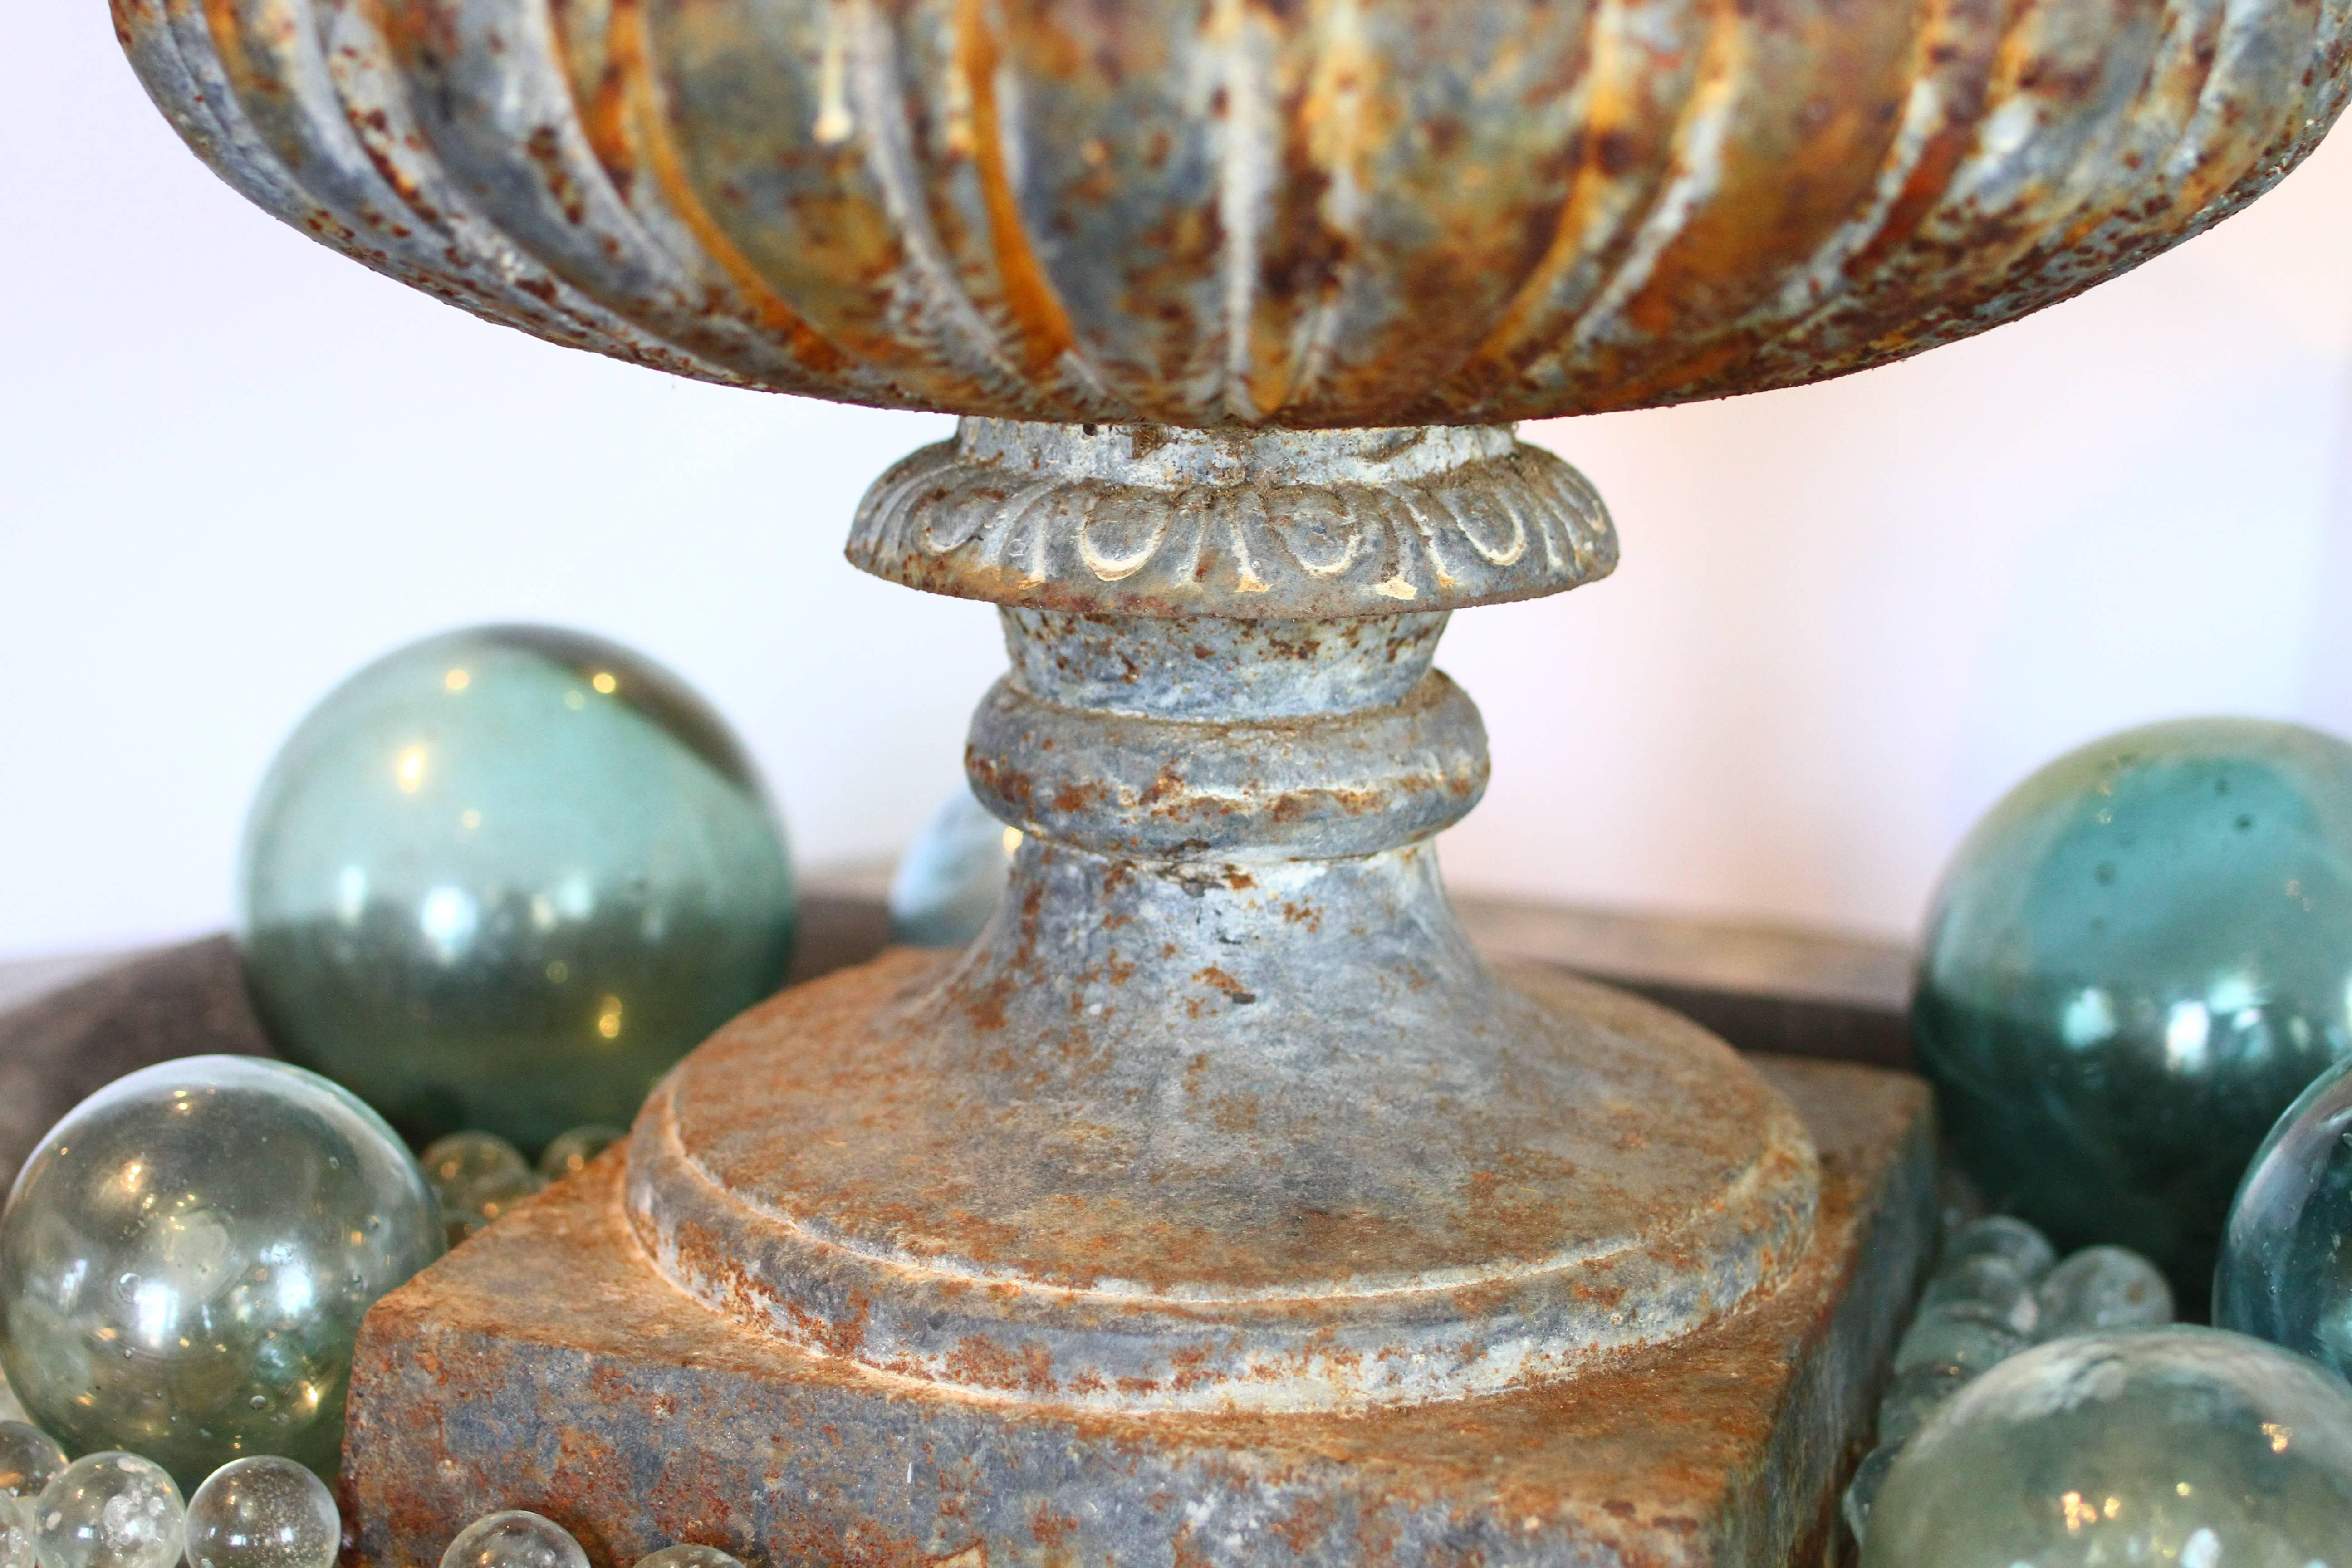 French Provincial Gorgeous 19th Century French Cast Iron Garden Urn with Egg and Dart Rim